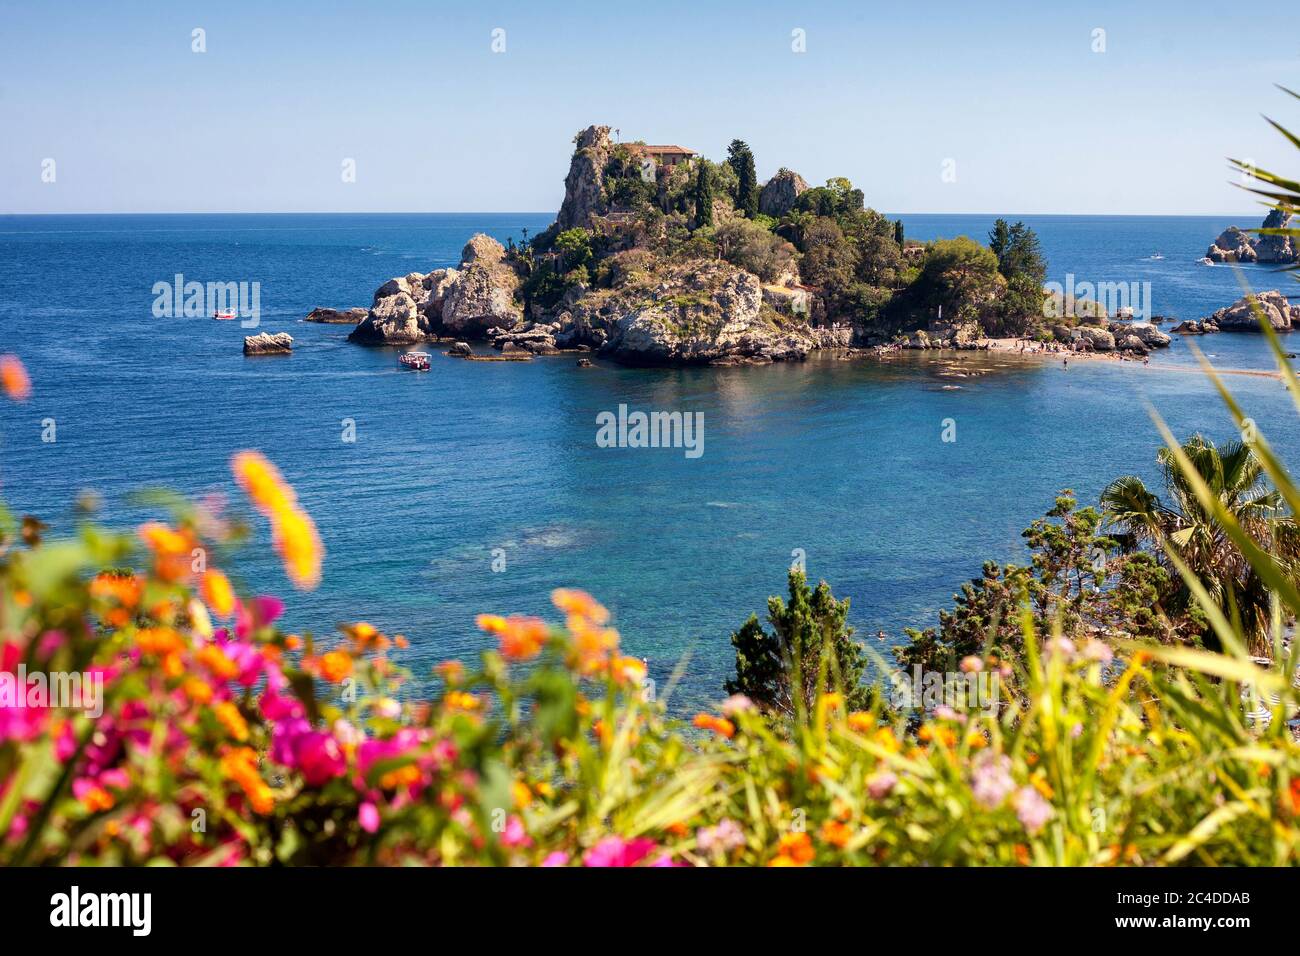 The Isola Bella island and beach with blurred flowers in the front in Taormina, Italy Stock Photo